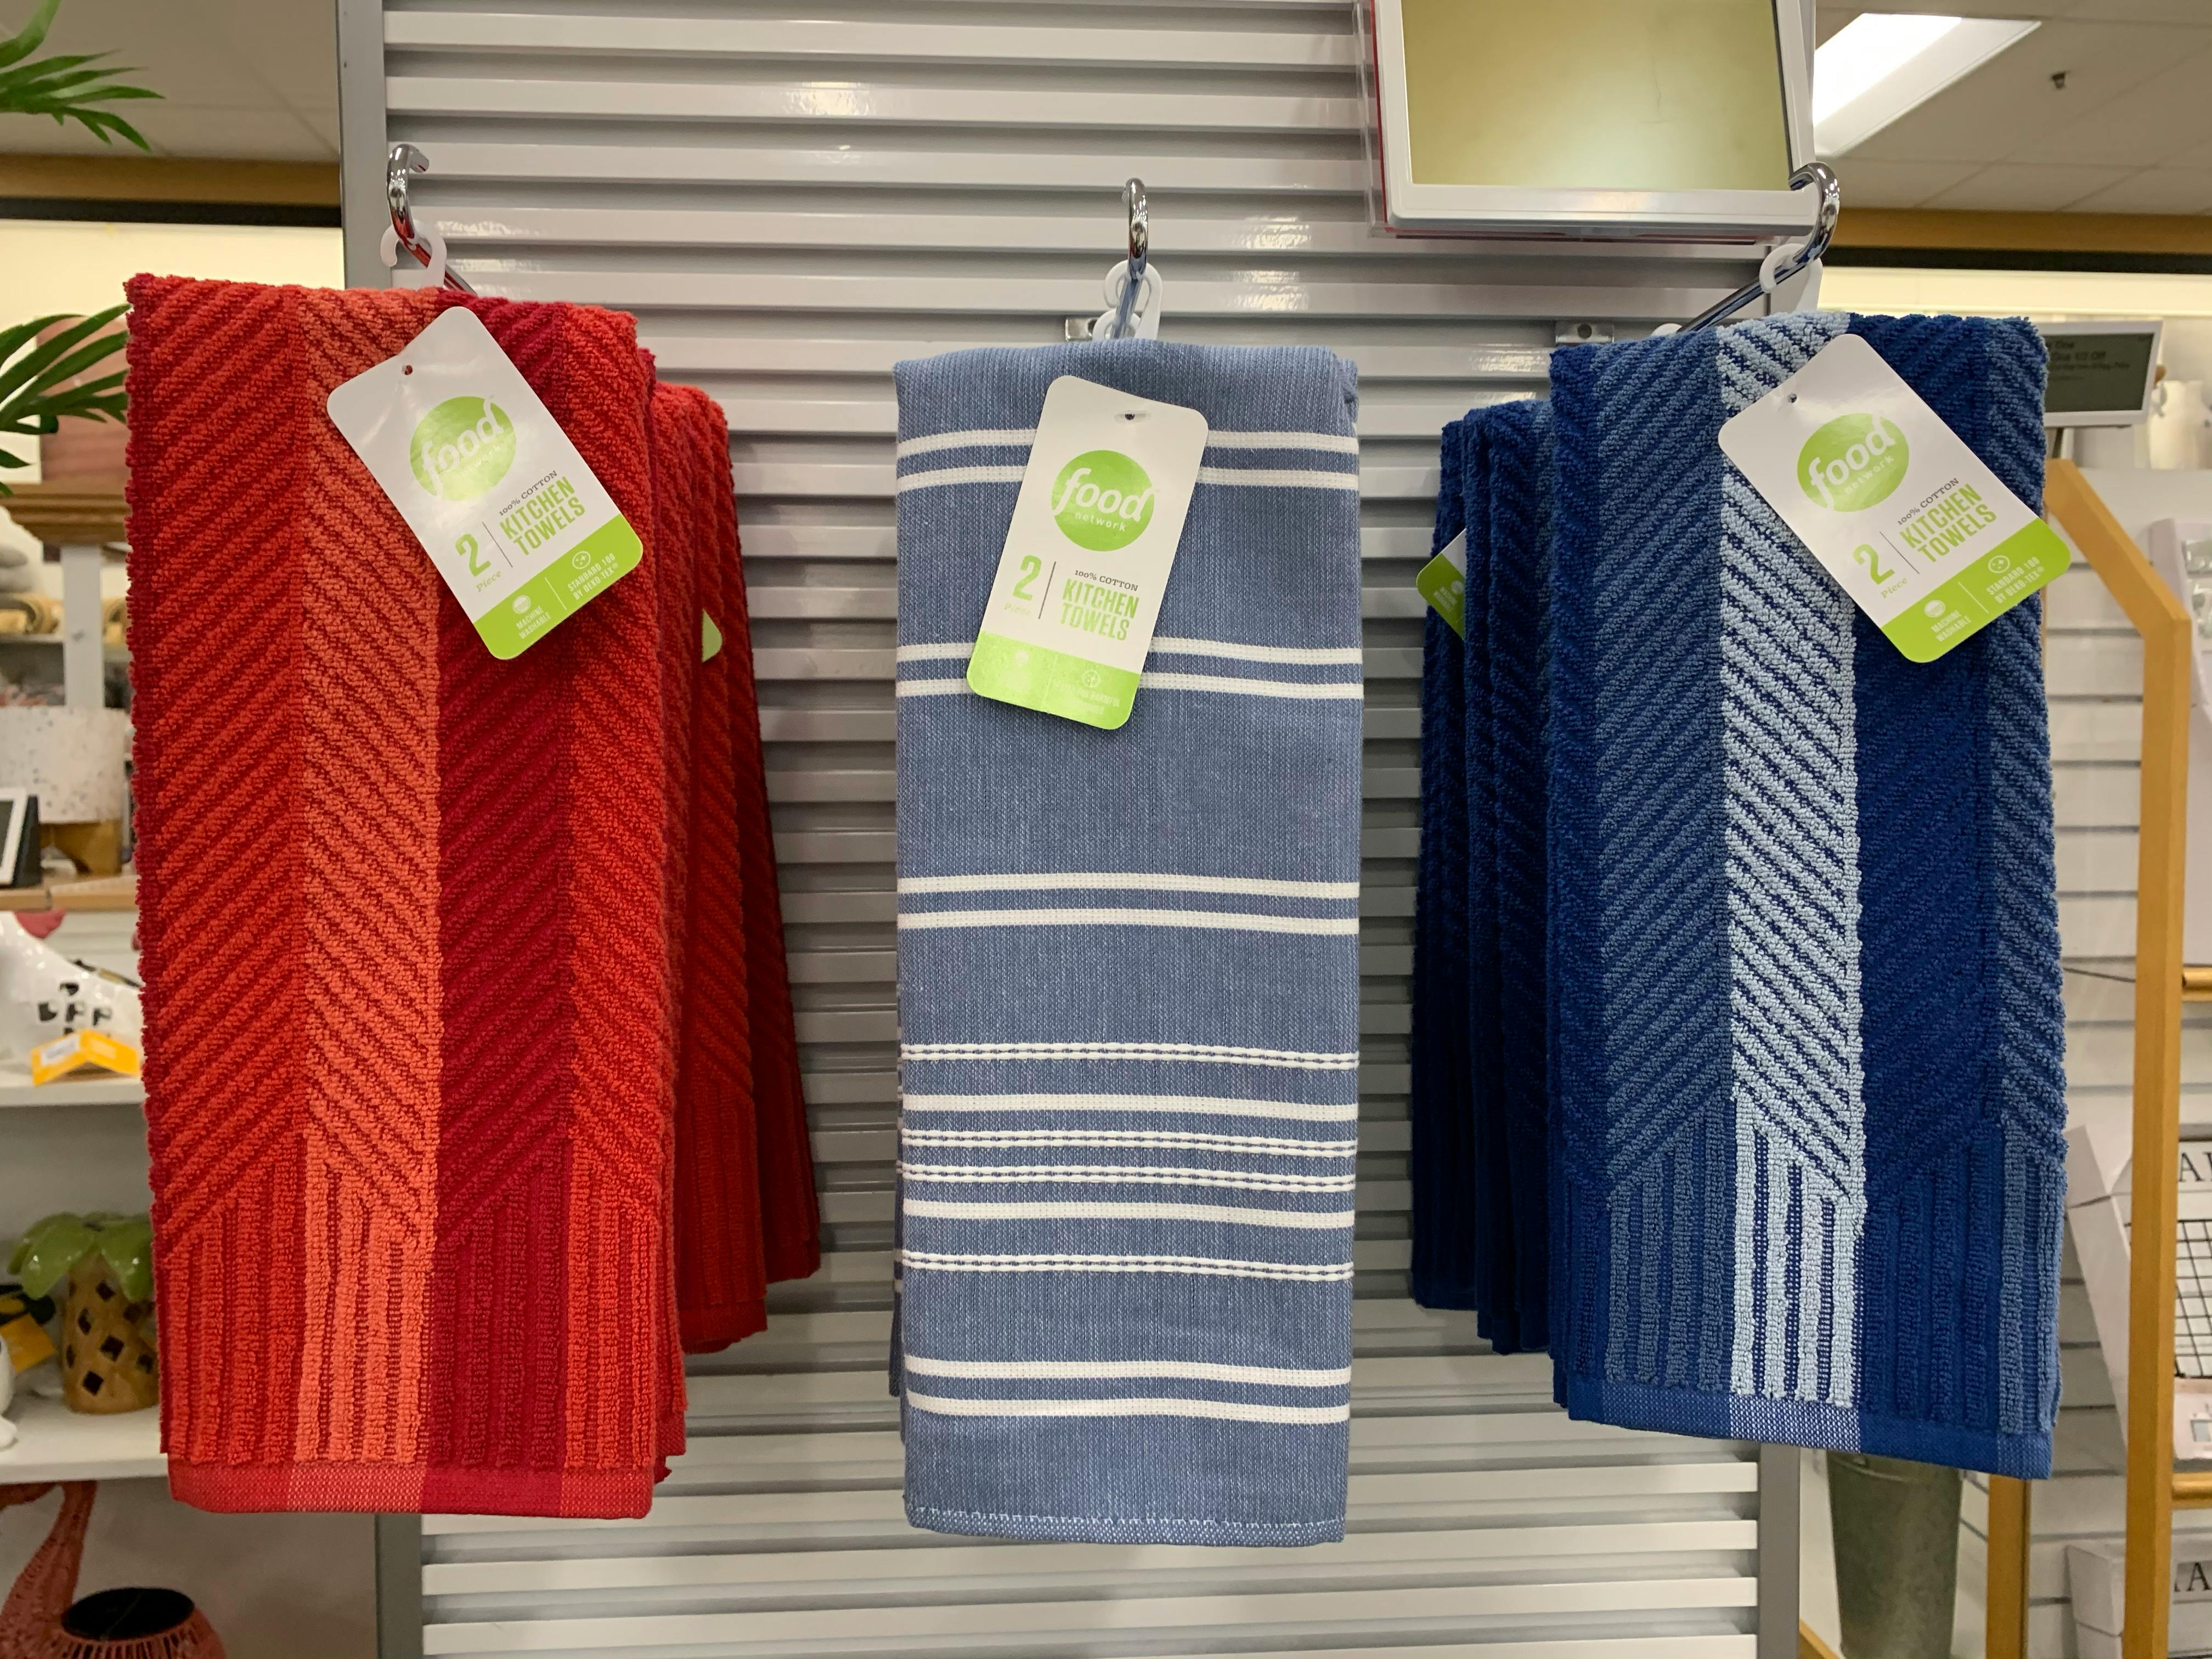 Food Network Kitchen Towels 2-Pack, Now $5.72 at Kohl's ($2.86 per Towel) -  The Krazy Coupon Lady